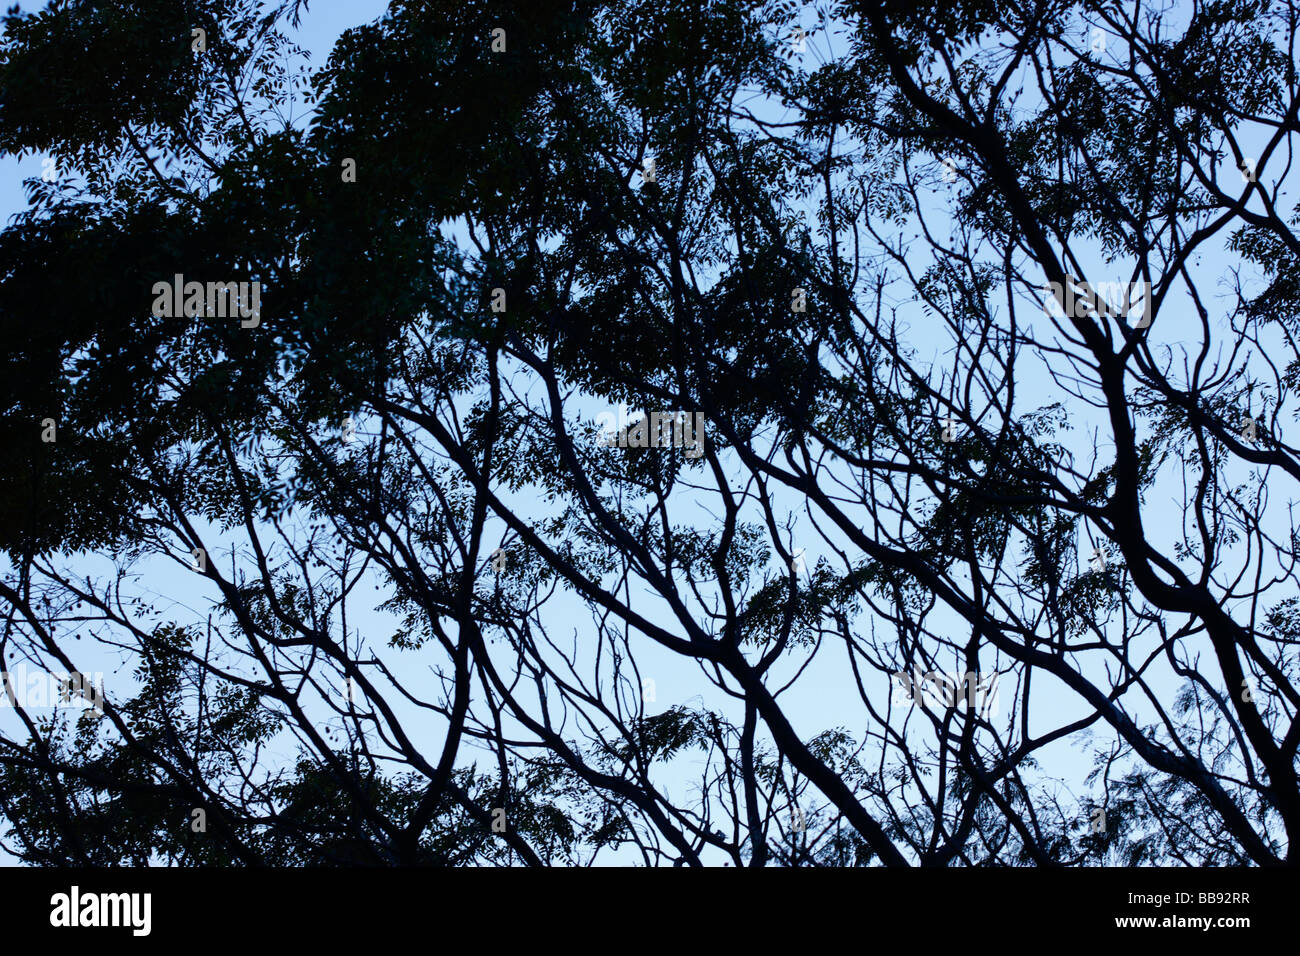 A close up view of a tree in Tainan, Taiwan. Stock Photo